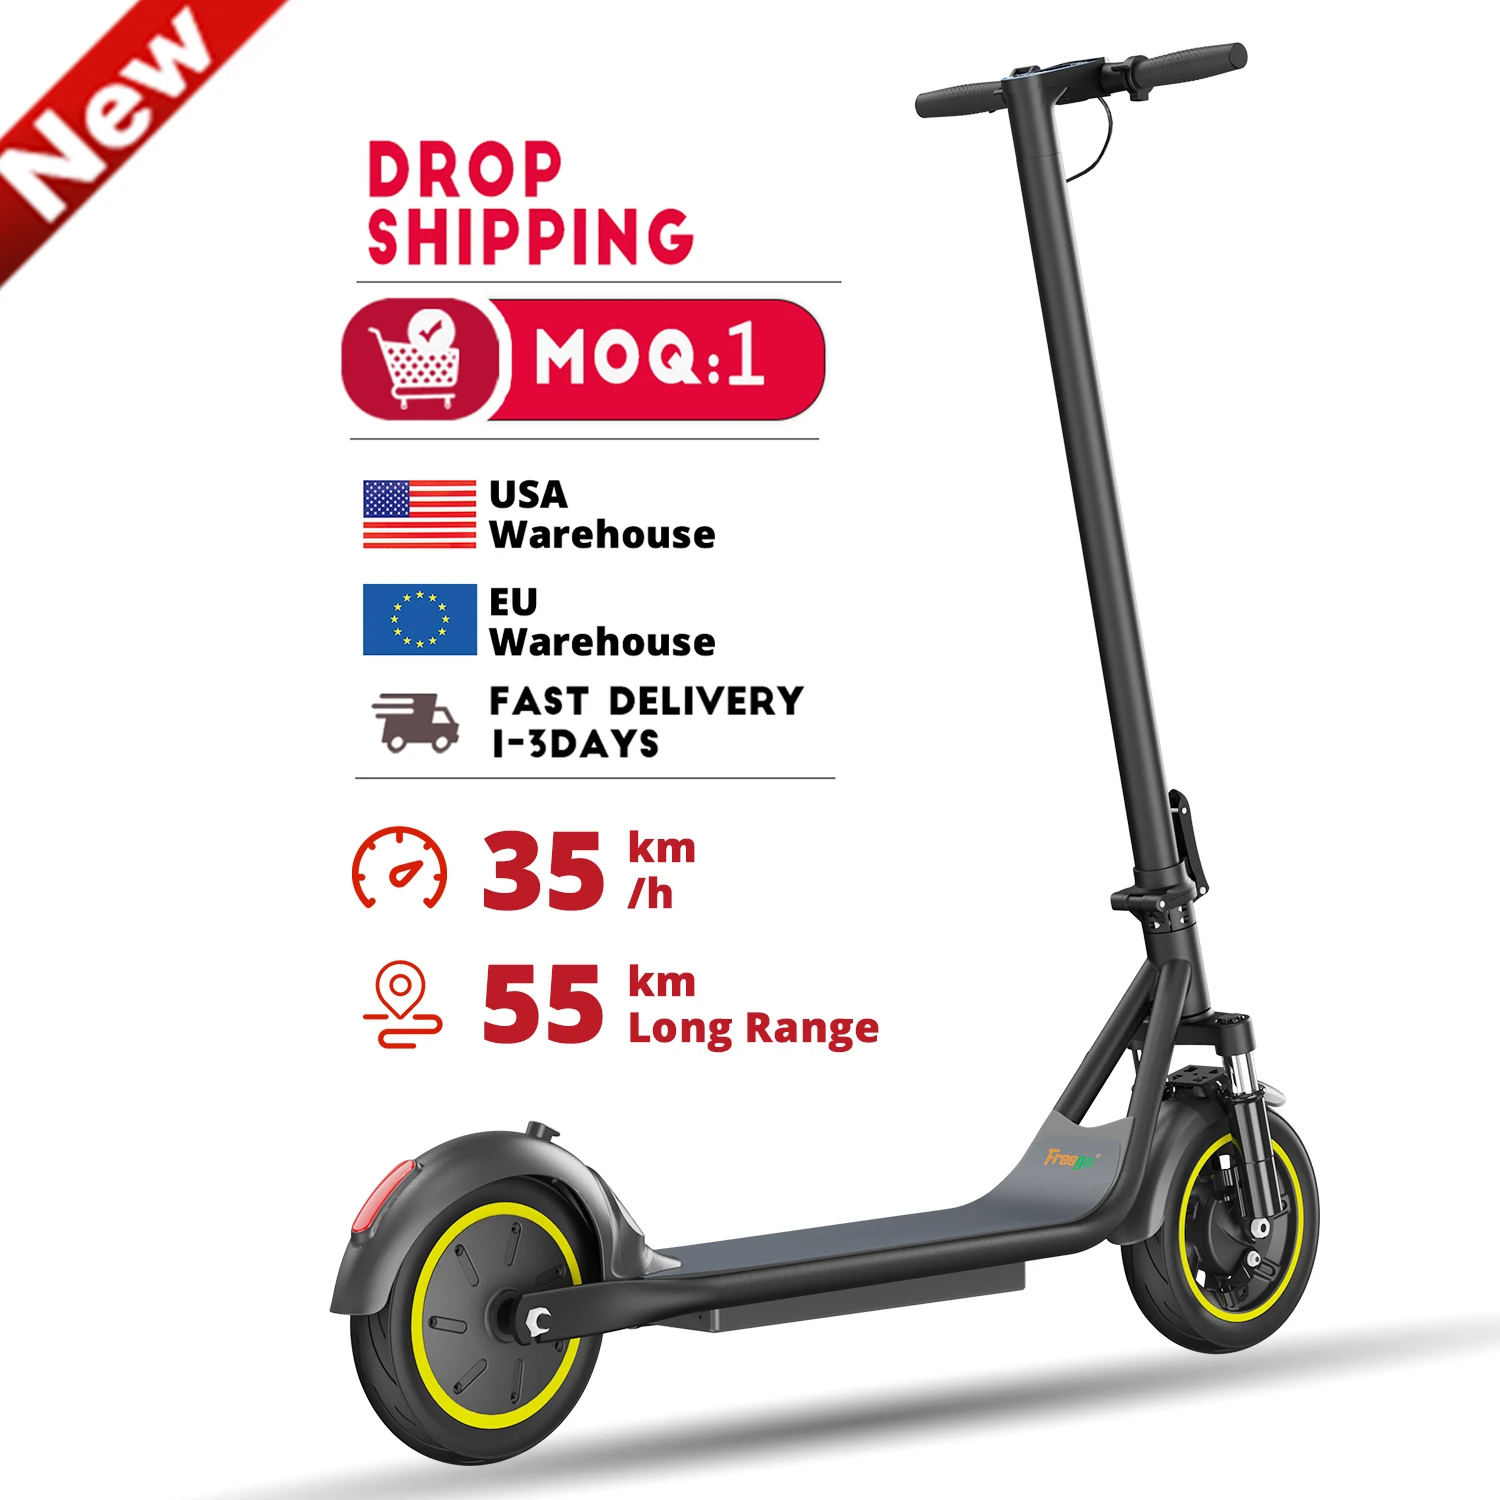 New Design cheap Foldable Pro Scooter 2021 USA Warehouse New Arrival Electric Scooter Of Adult Electric Scooters Drop Shipping